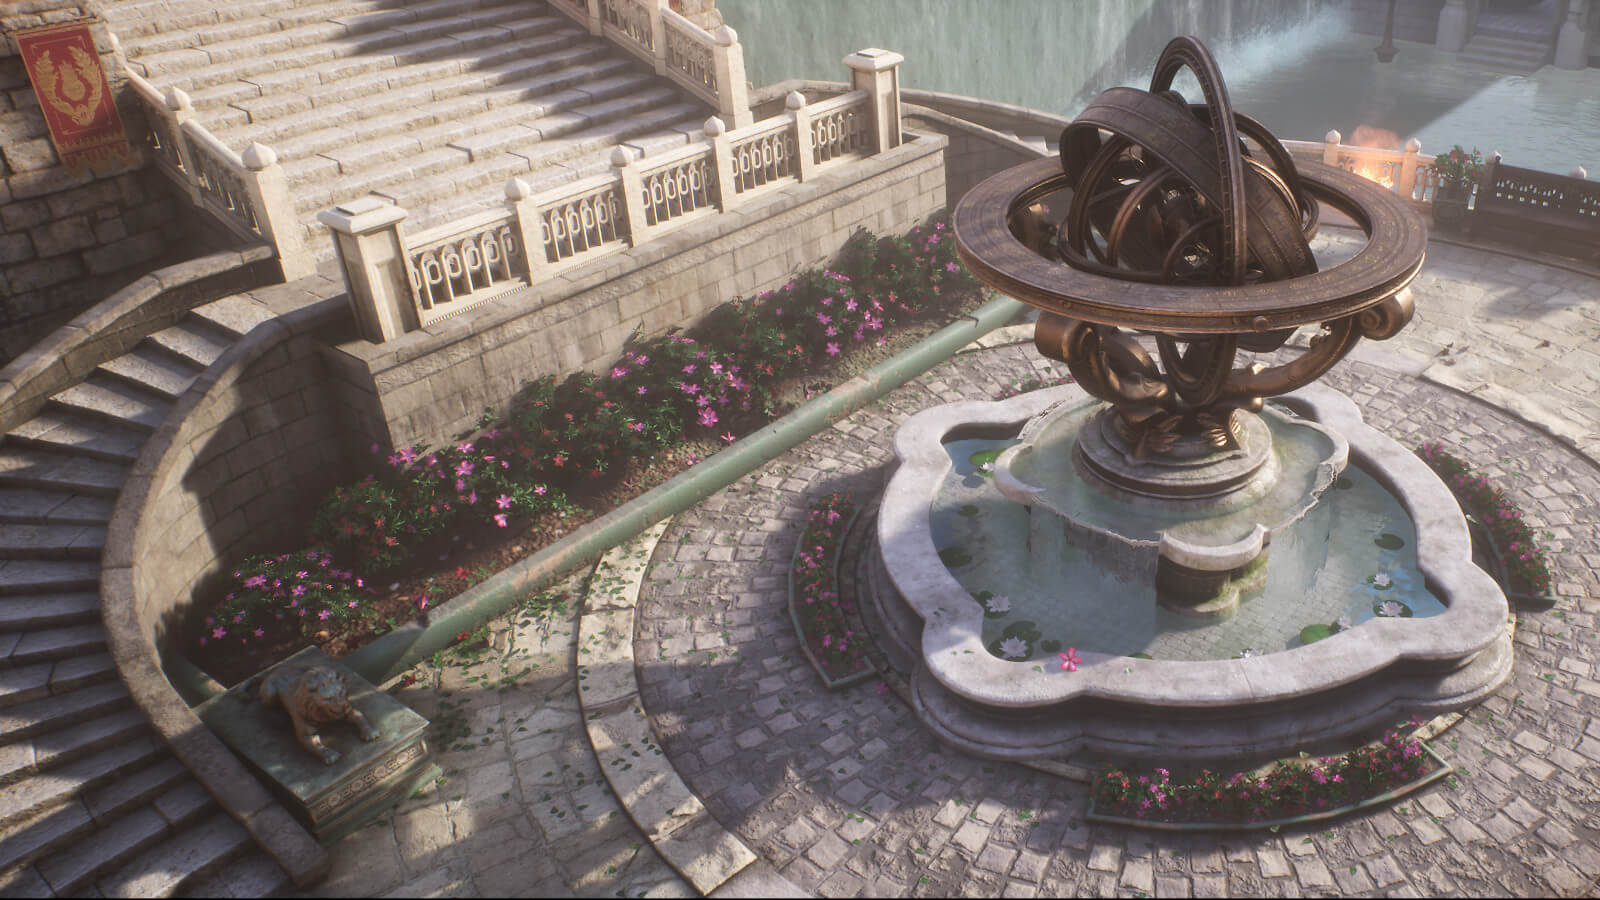 Plaza with fountain